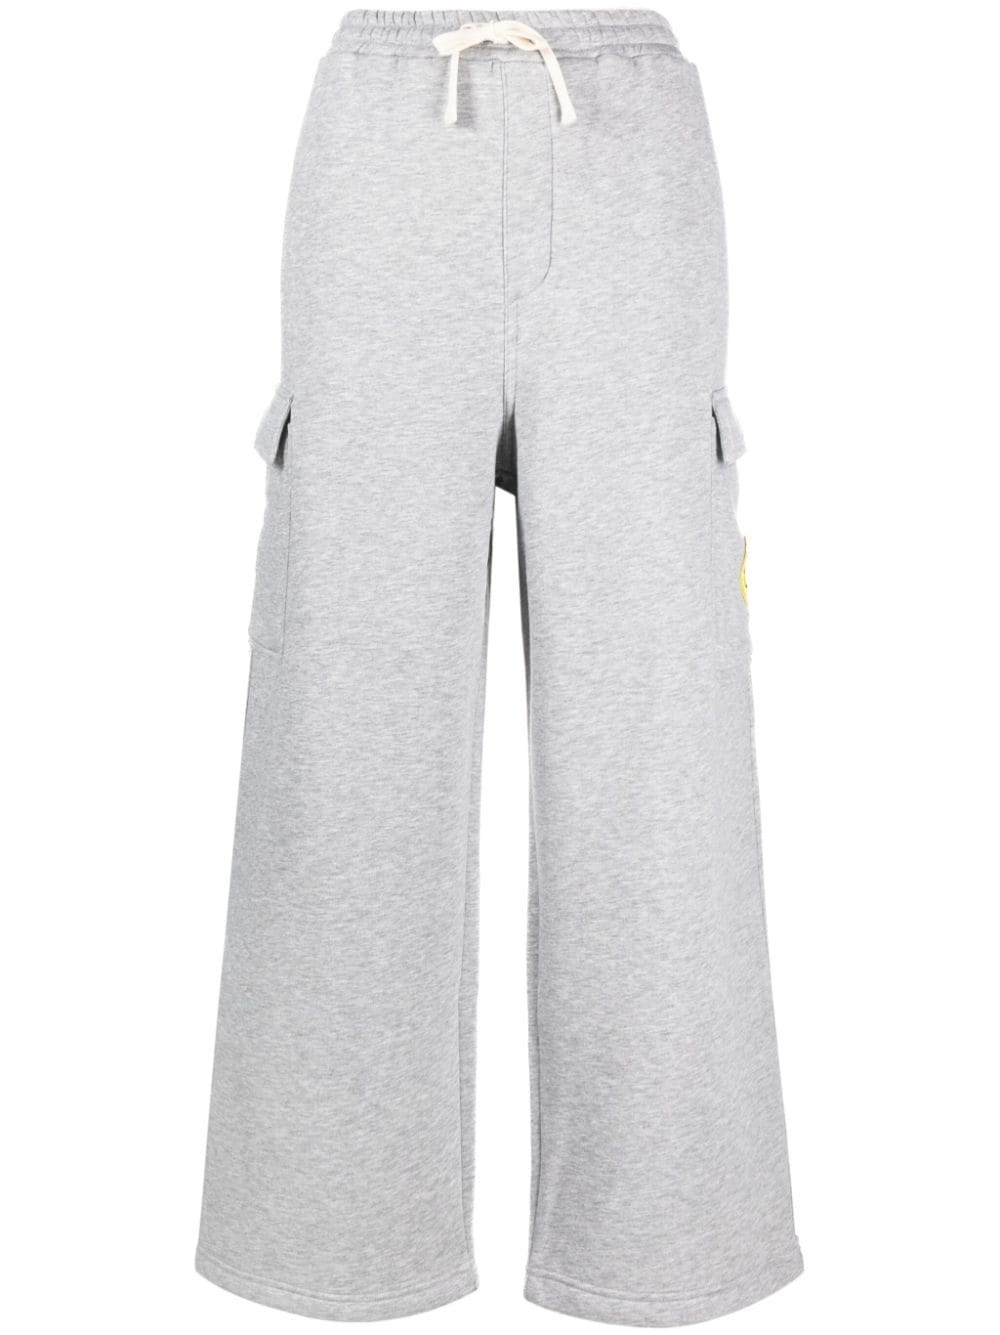 smiley-face track trousers - 1